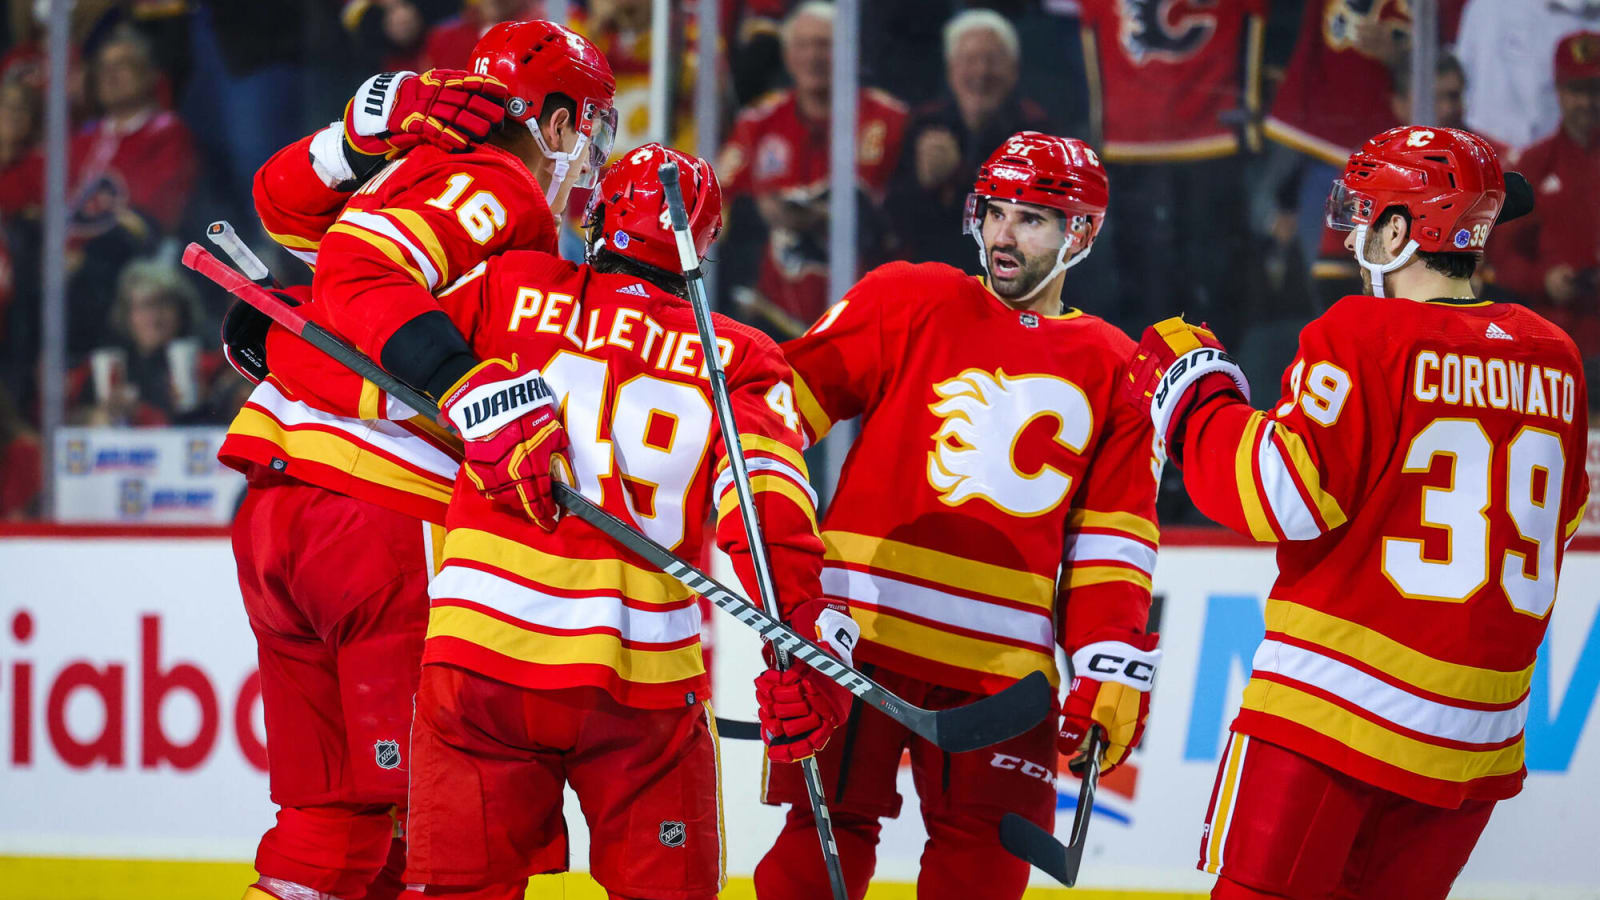 2023-24 Calgary Flames predictions: The Flames qualify for the 2023-24 post-season